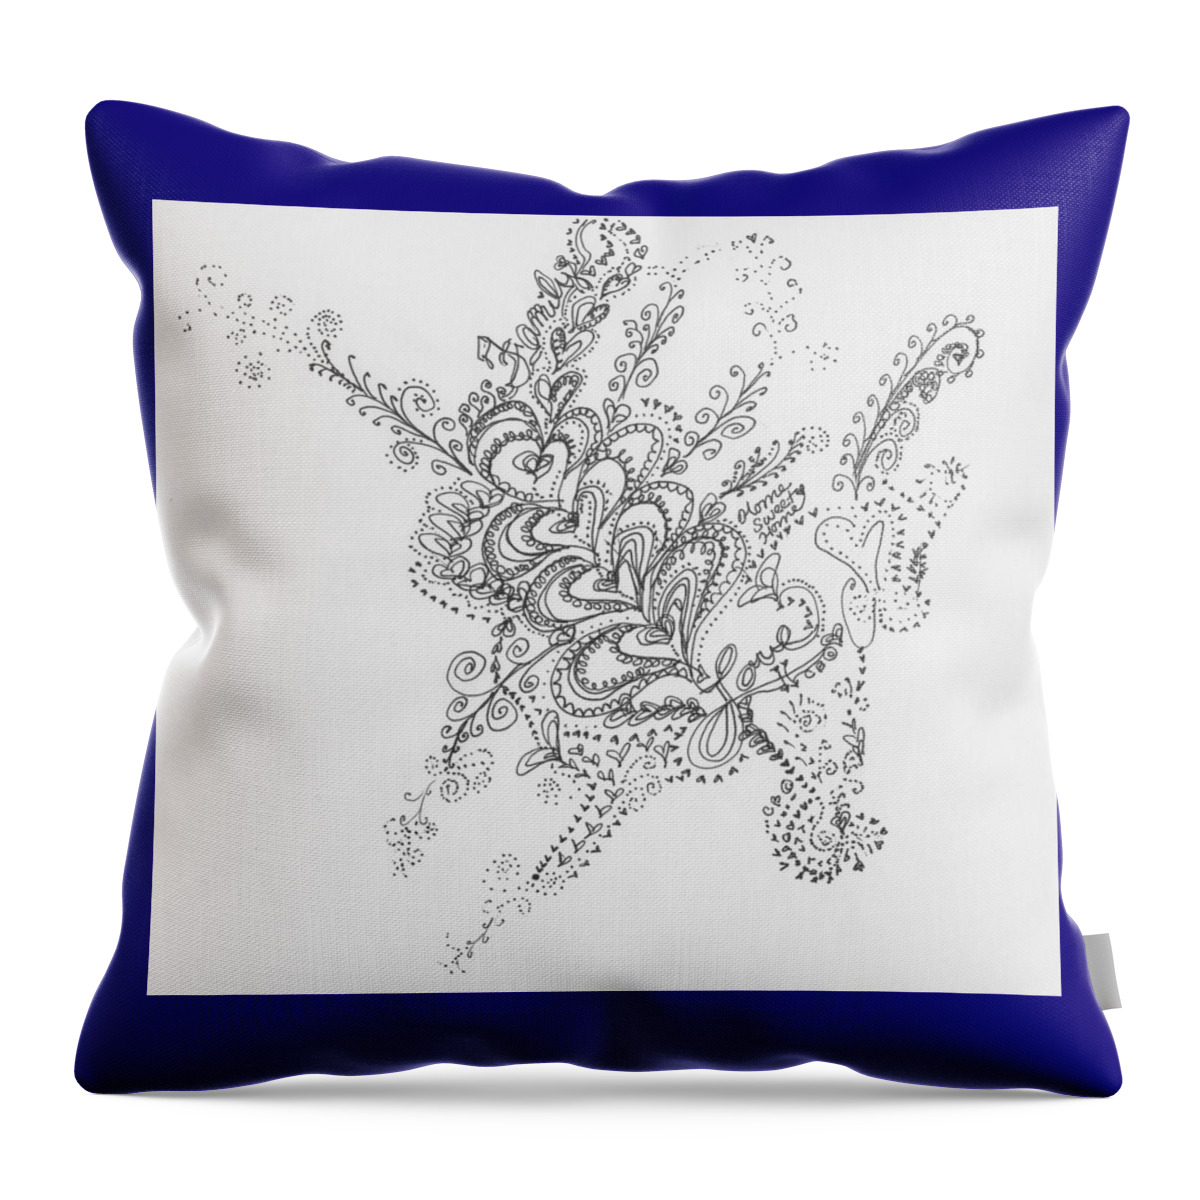 Caregiver Throw Pillow featuring the drawing Swirls by Carole Brecht